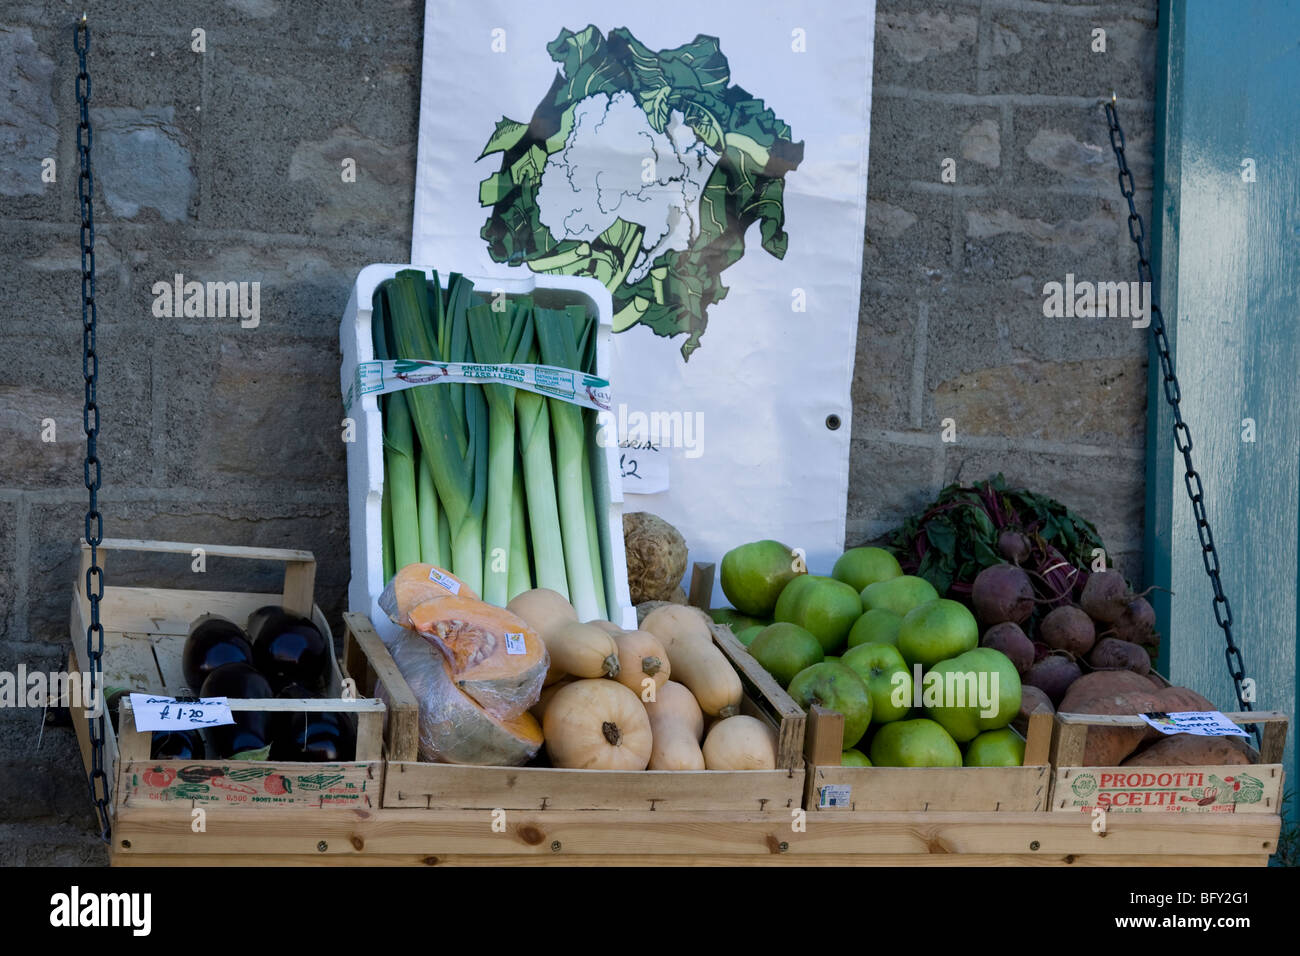 Colourful display of fresh organic vegetables in a box against a wall for sale Stock Photo